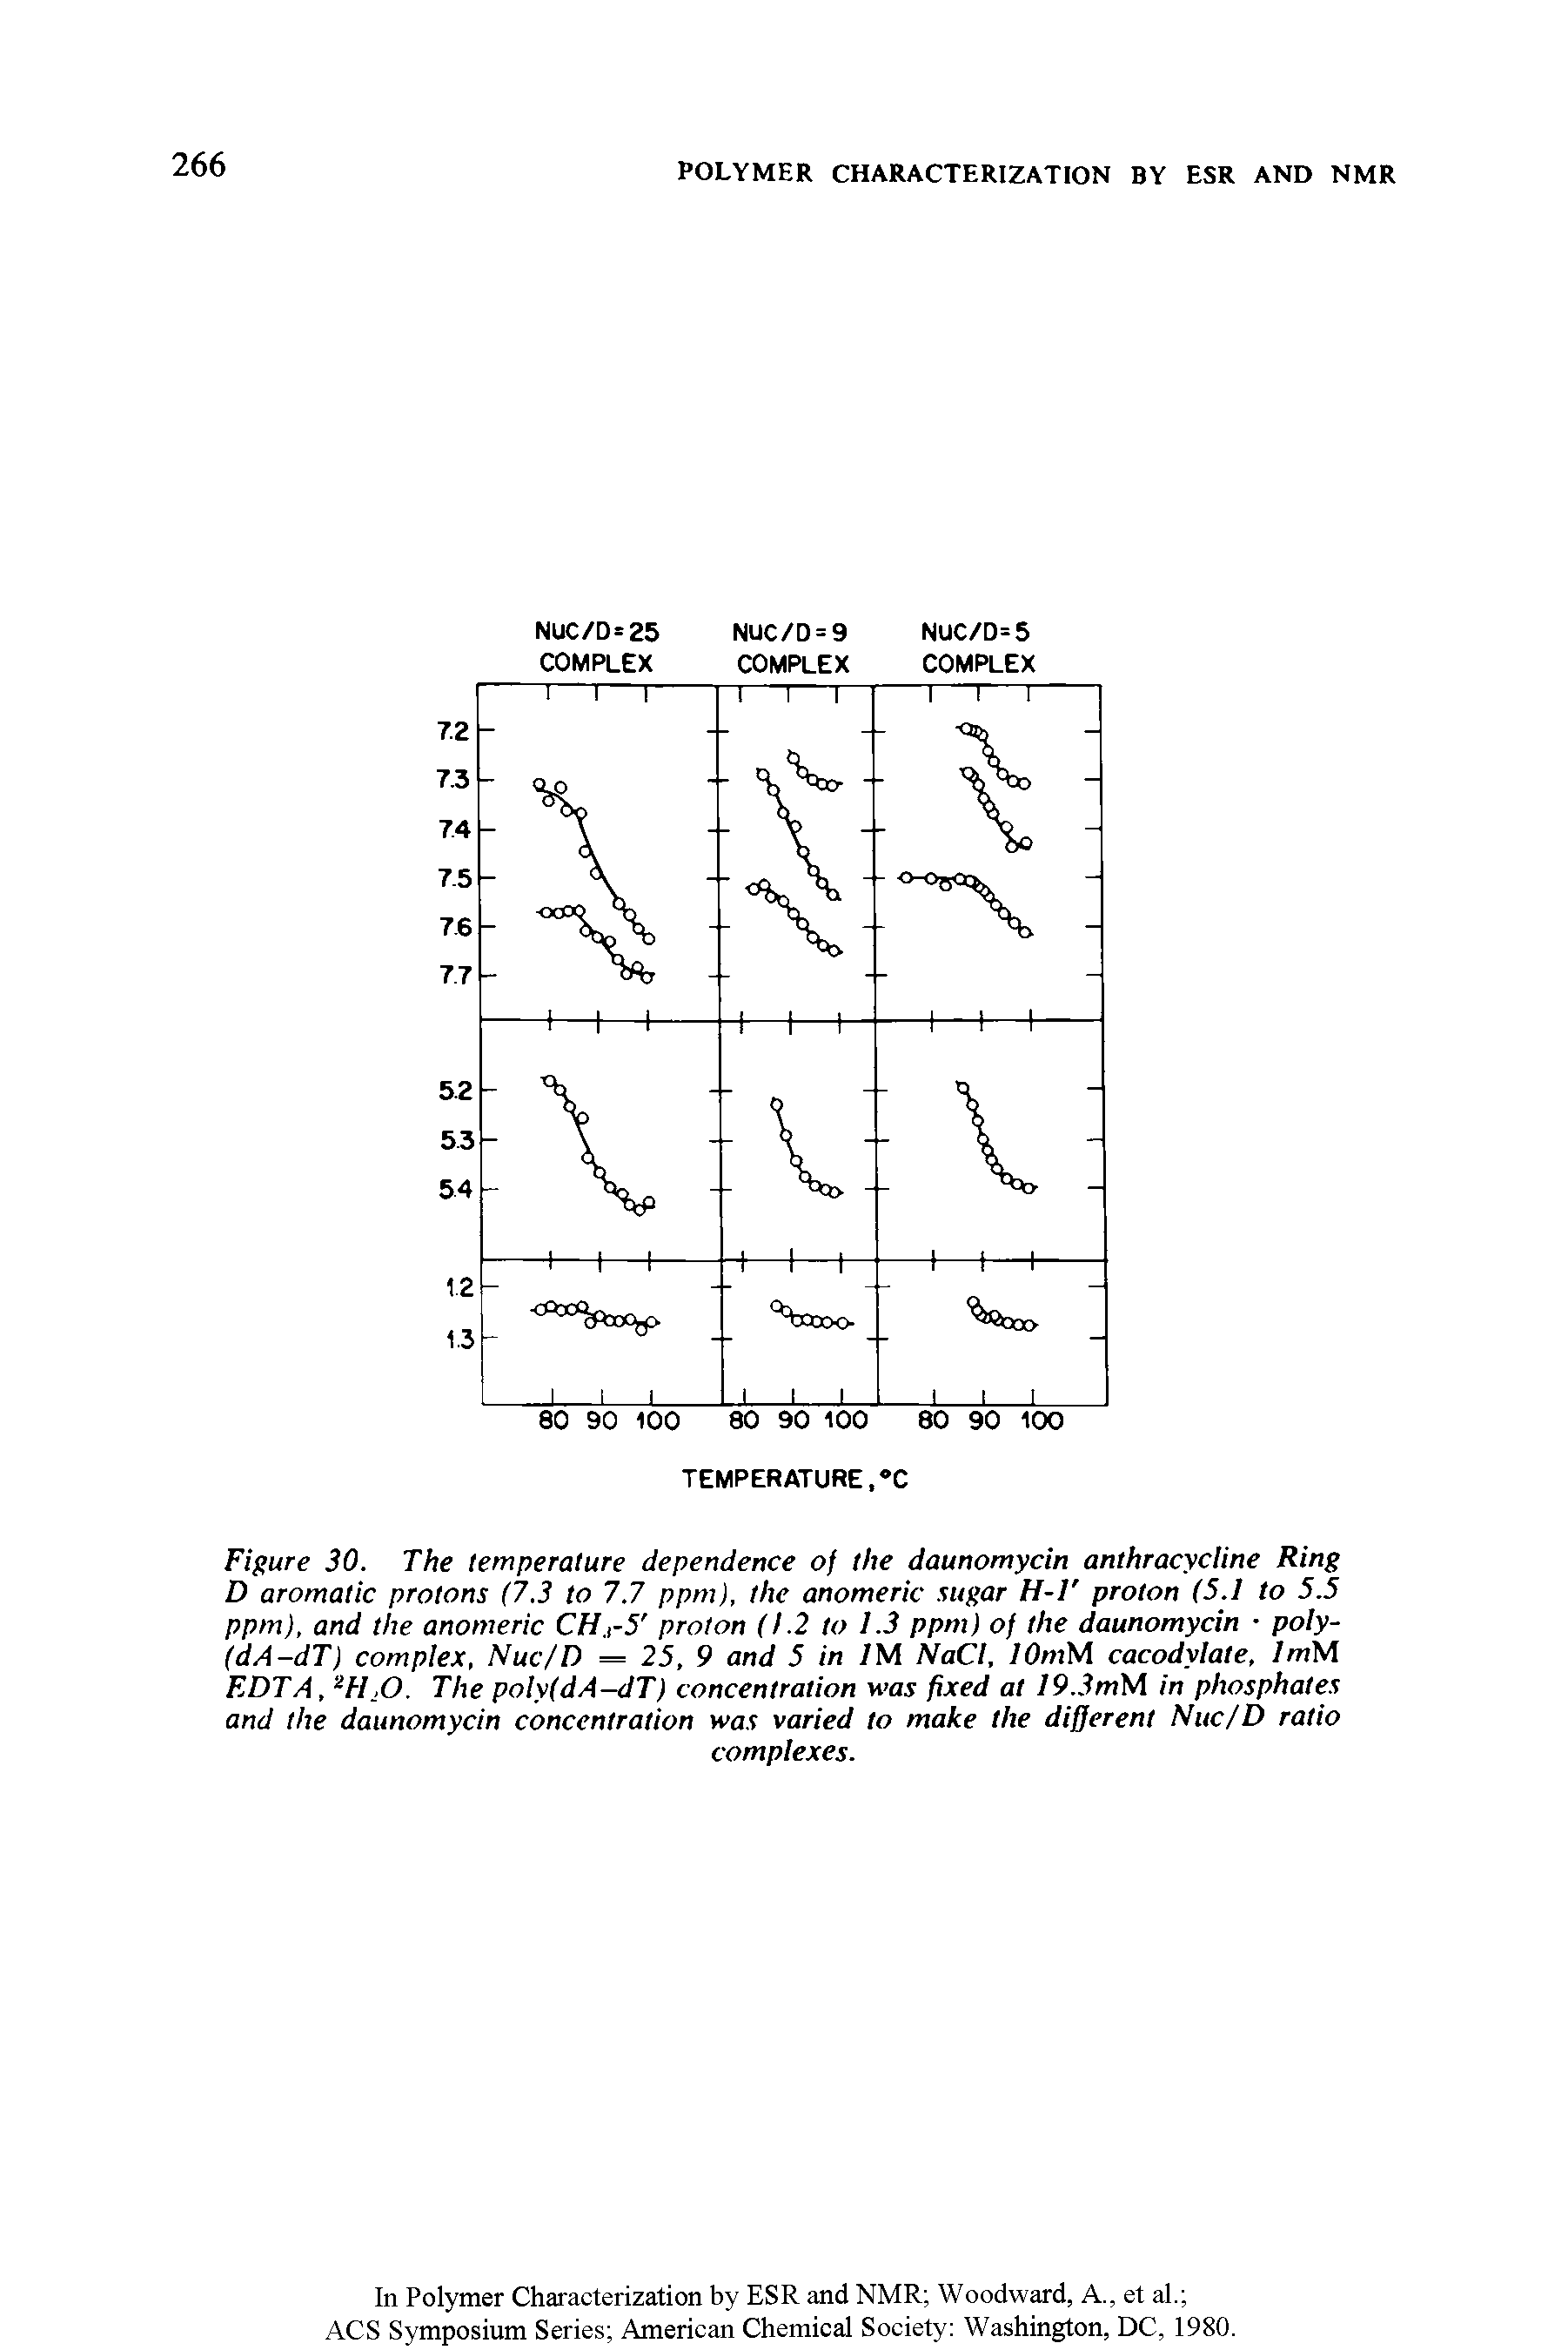 Figure 30. The temperature dependence of the daunomycin anthracycline Ring D aromatic protons (7.3 to 7.7 ppm), the anomeric sugar H-V proton (5.1 to 5.5 ppm), and the anomeric CH.,-5 proton (1.2 to 1.3 ppm) of the daunomycin poly-(dA-dT) complex, Nuc/D = 25, 9 and 5 in 1M NaCl, lOmM cacodvlate, ImM EDTA, 2HjO. The poly(dA-dT) concentration was fixed at 19.3mM in phosphates and the daunomycin concentration was varied to make the different Nuc/D ratio...